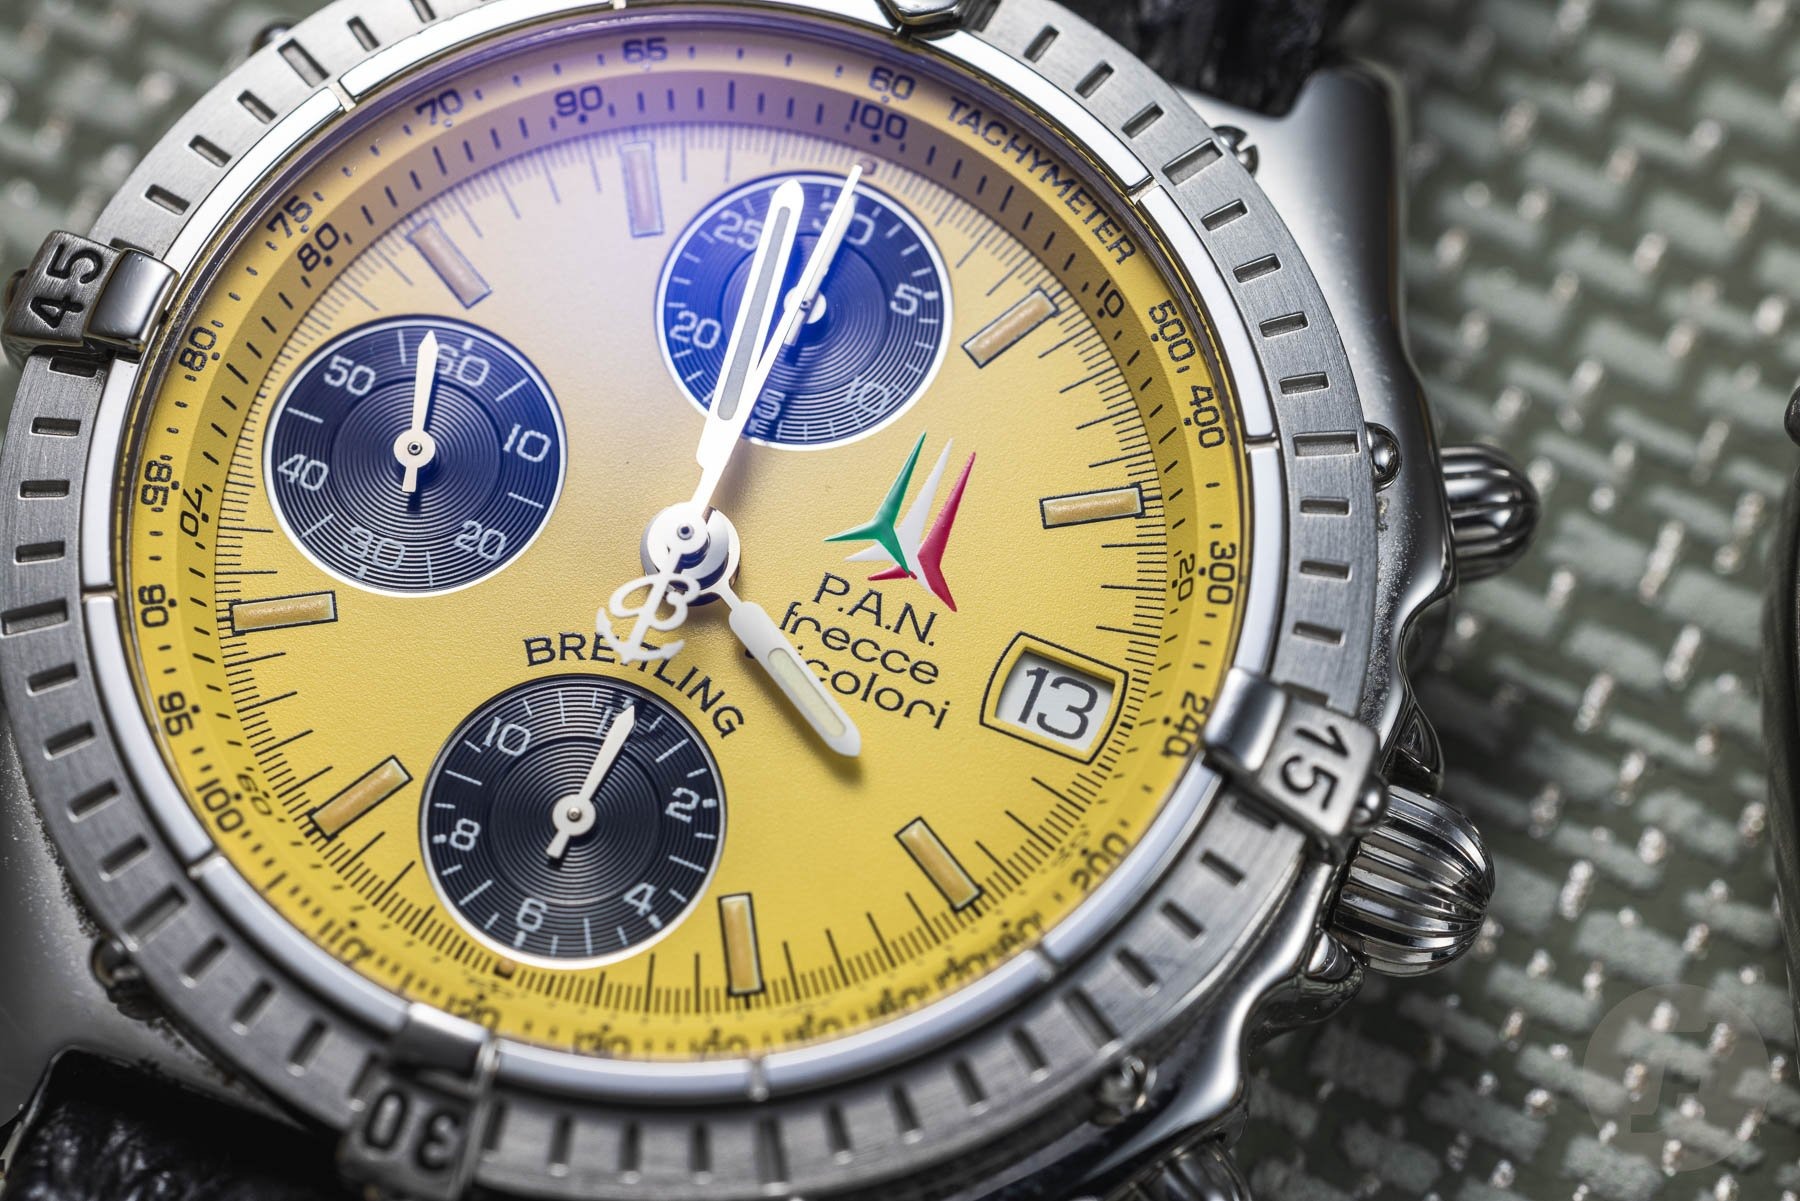 First Look: Aquastar Brand Dives Again With New Deepstar Re-Edition Chronograph